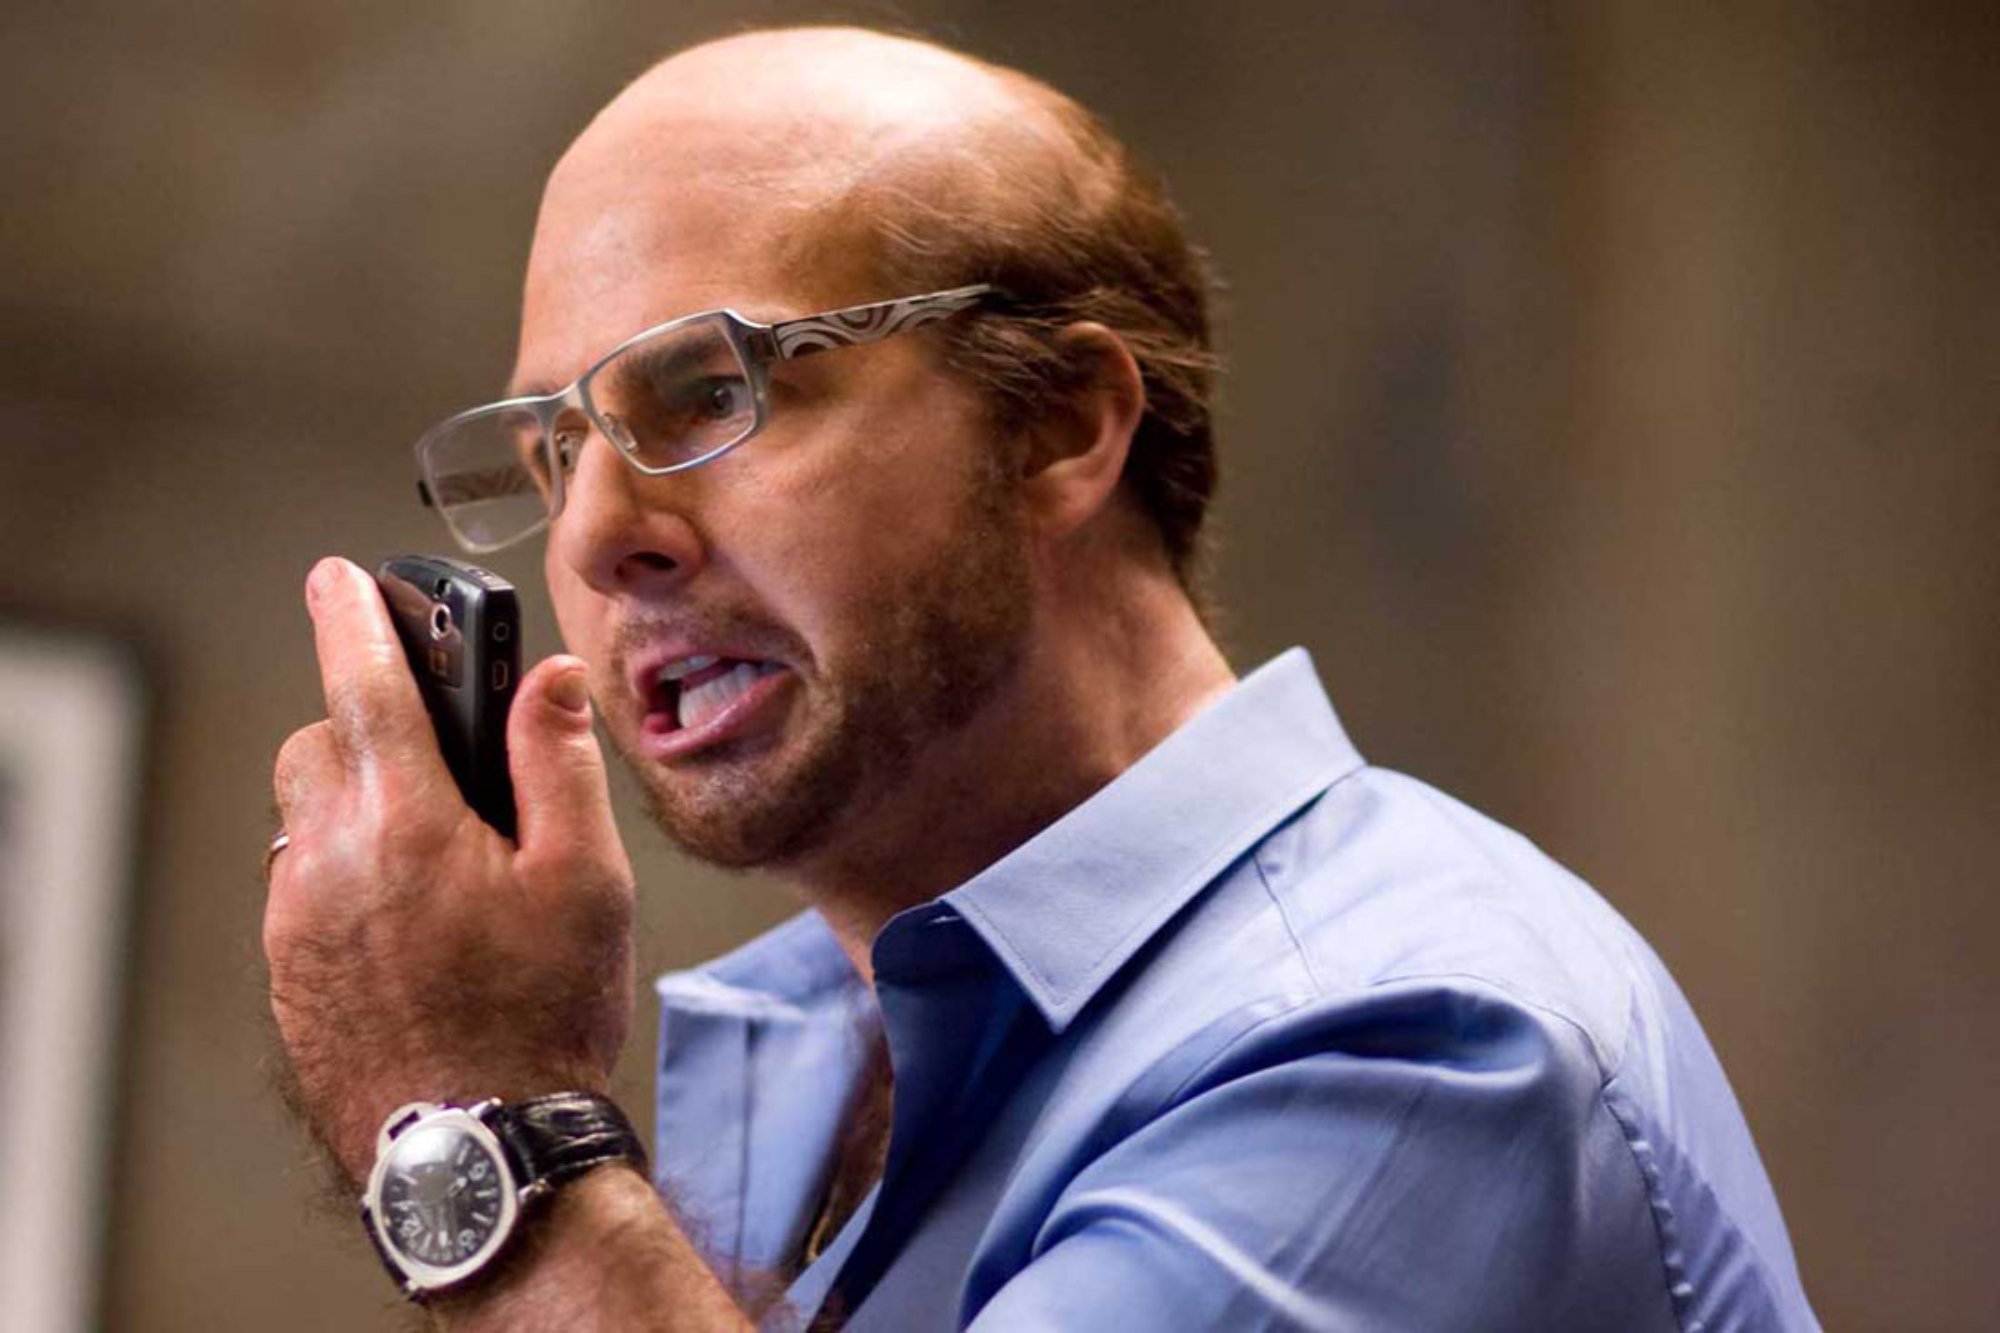 'Tropic Thunder' actor Tom Cruise as Les Grossman yelling into the phone wearing a collared dress shirt